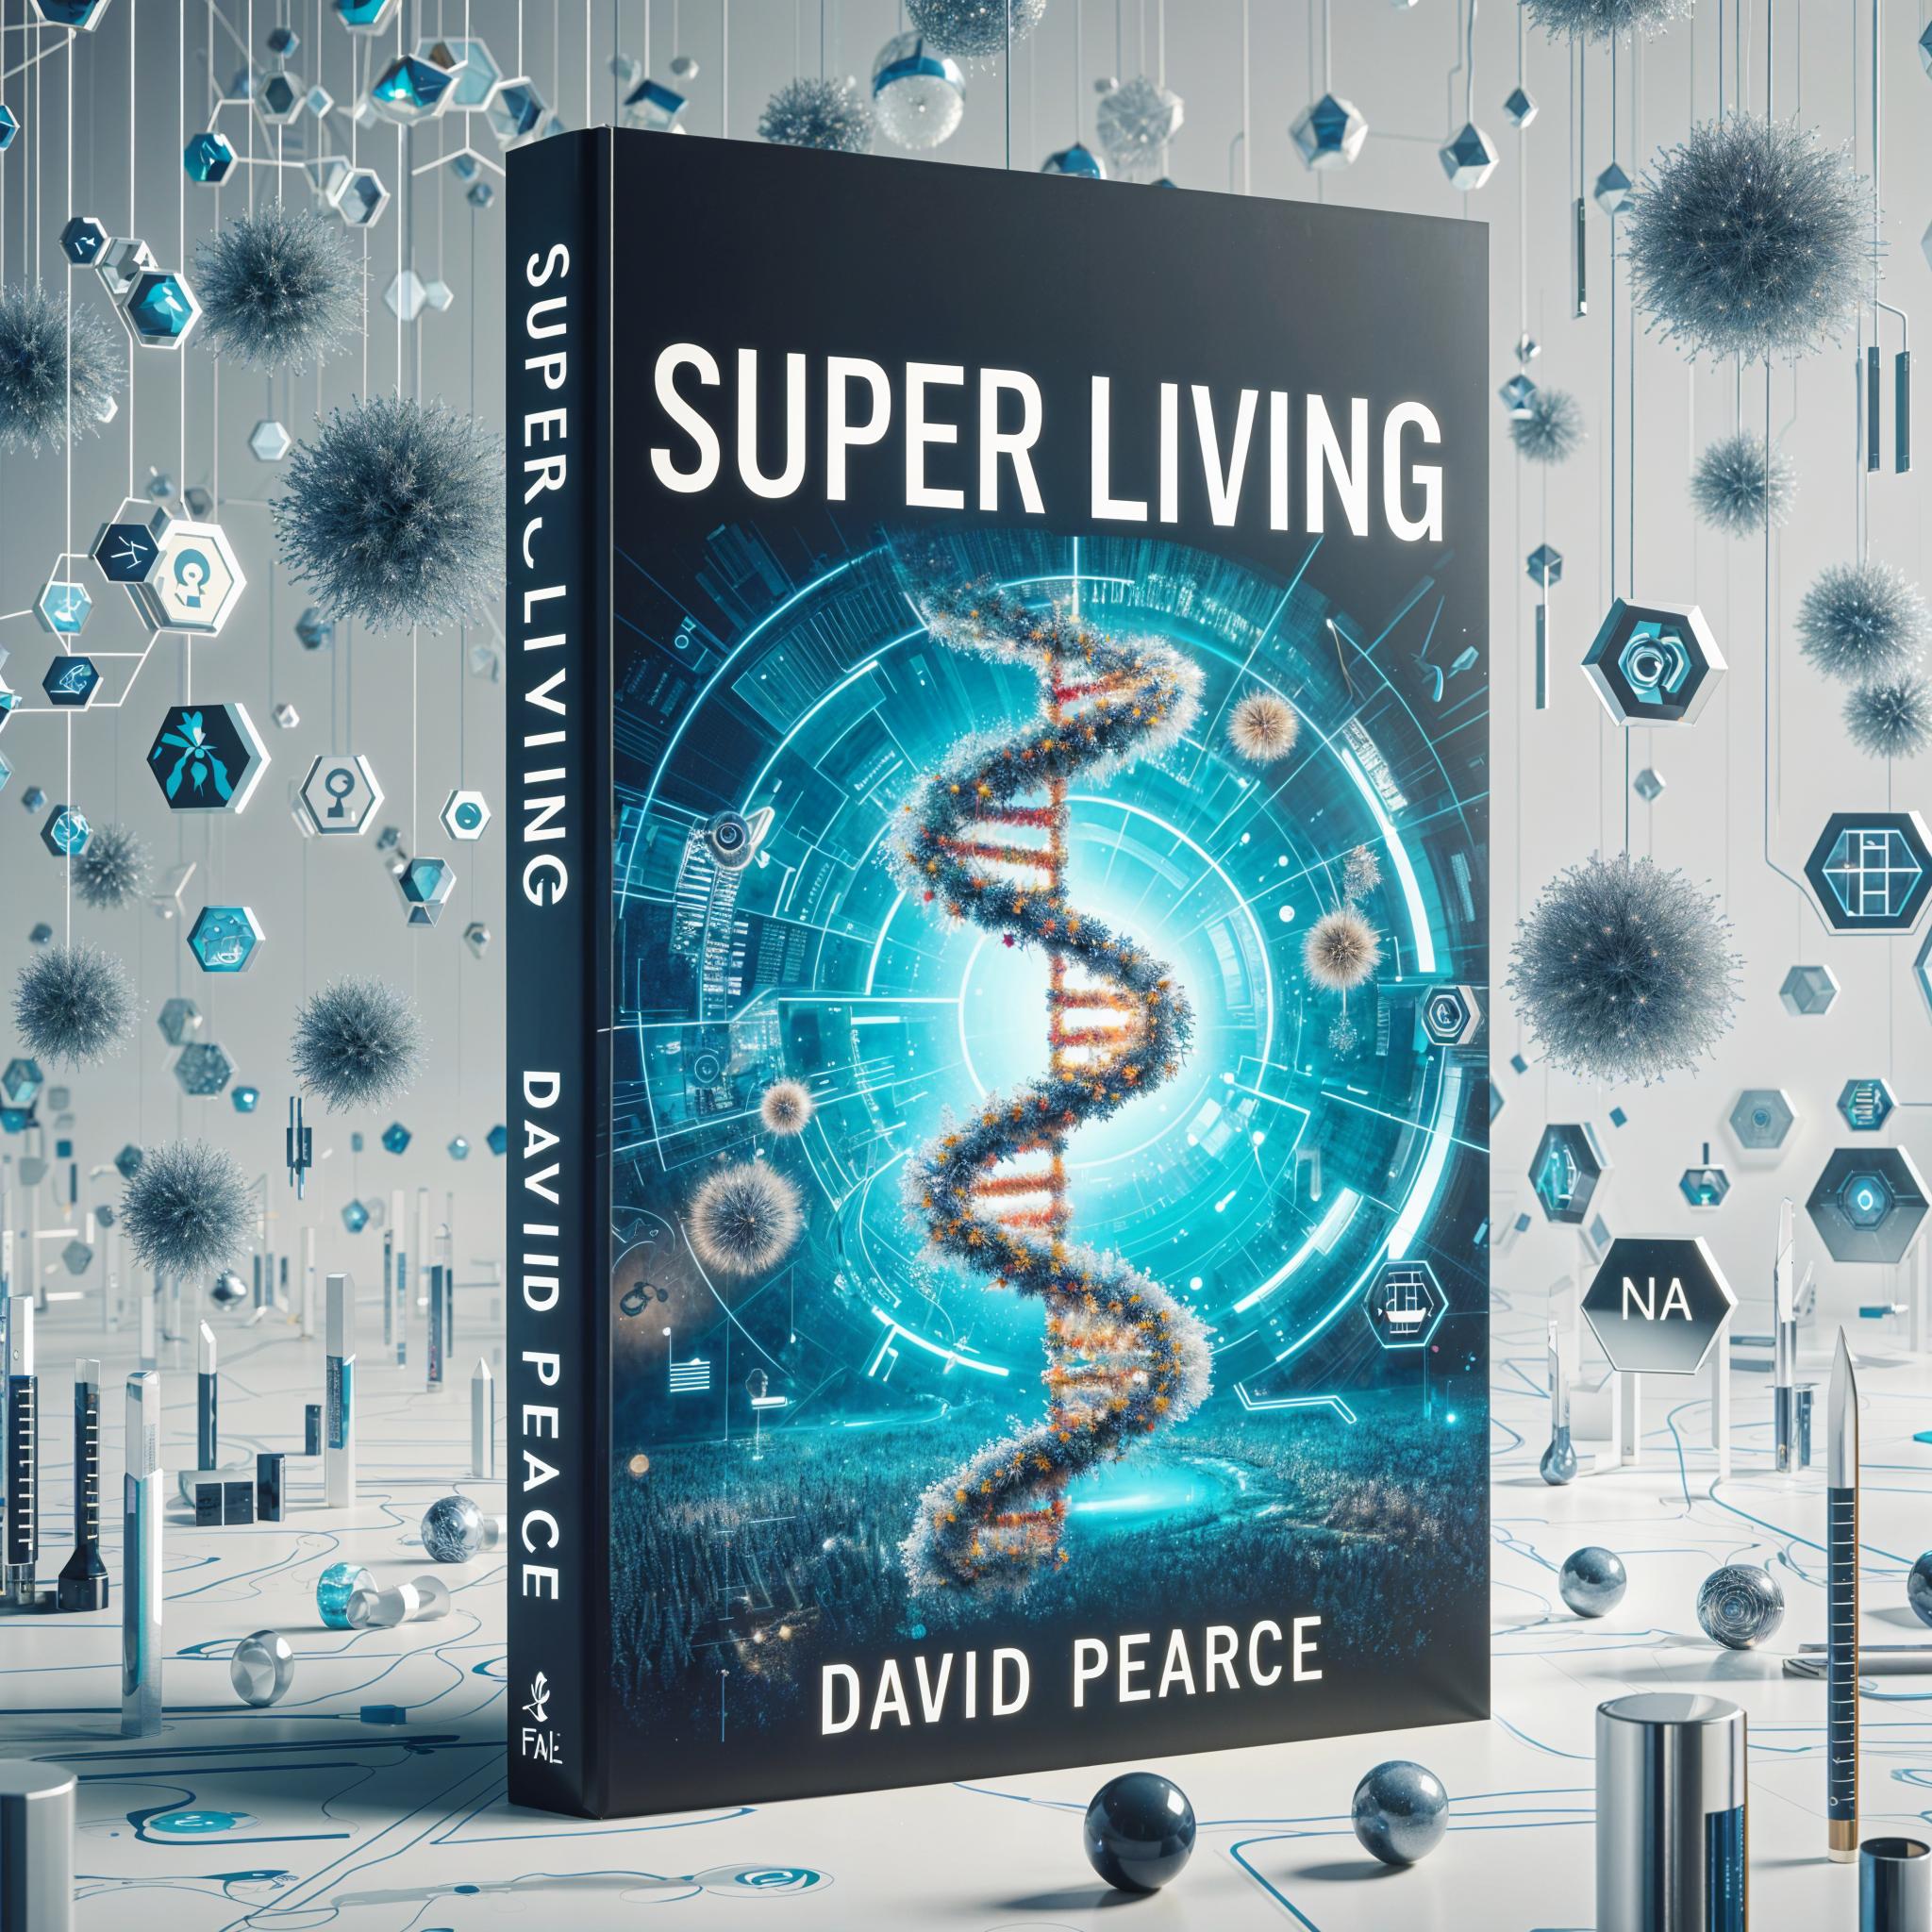 SuperLiving by David Pearce